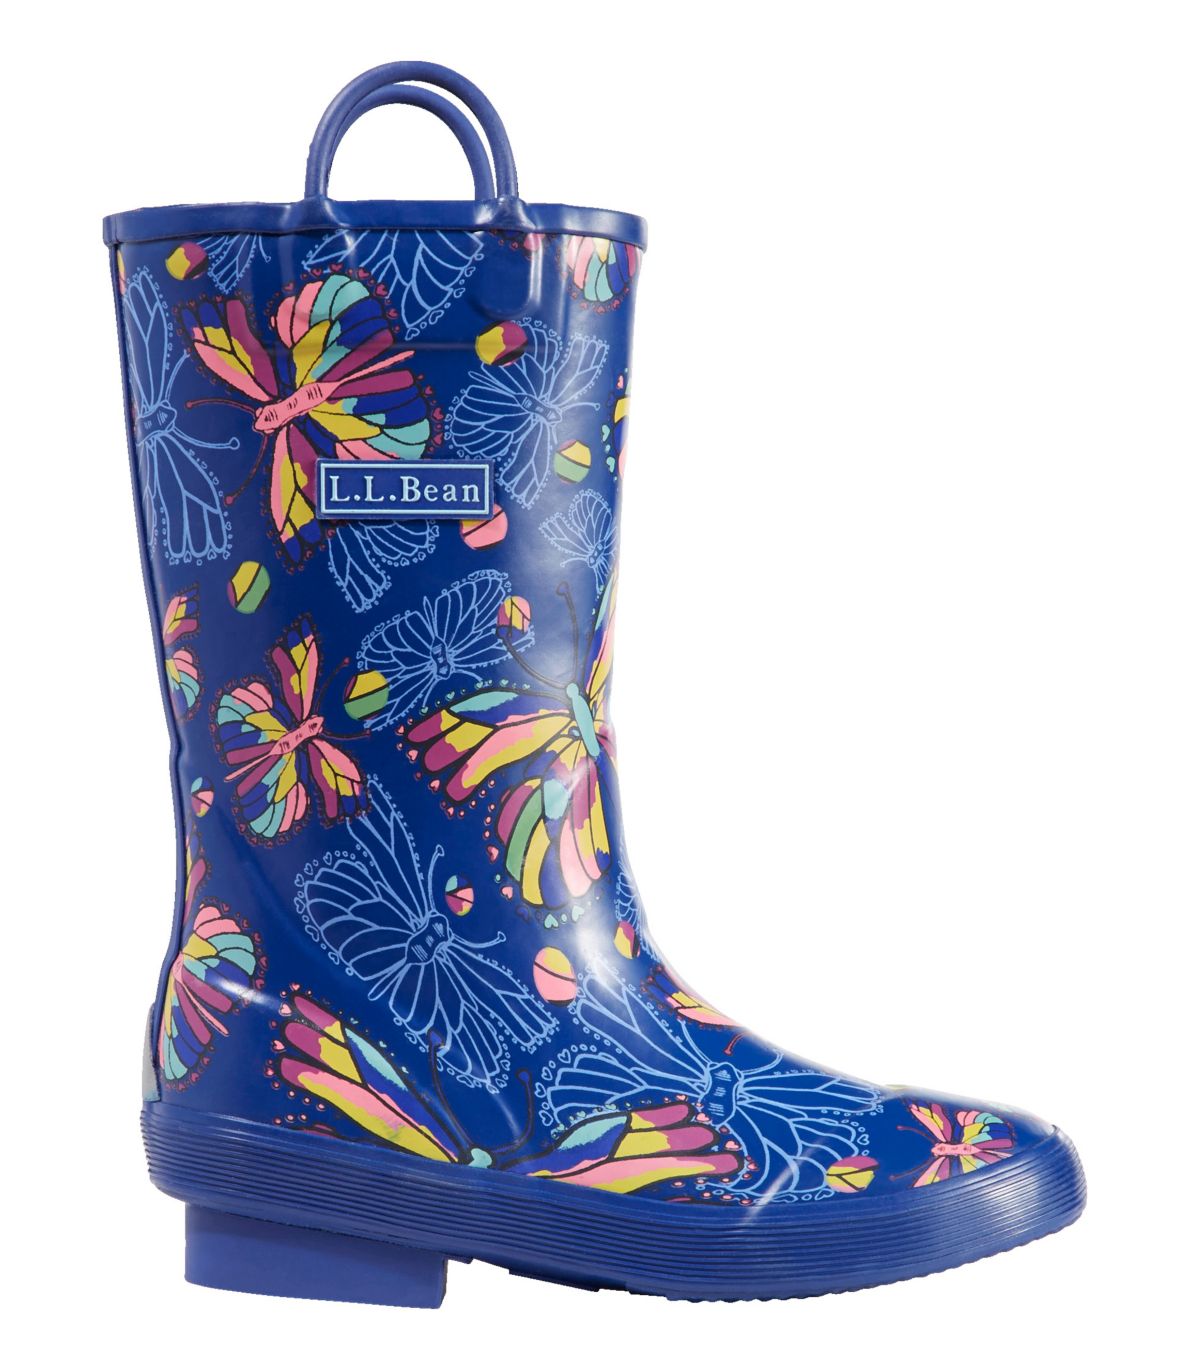 Kids' Puddle Stompers Rain Boots, Print